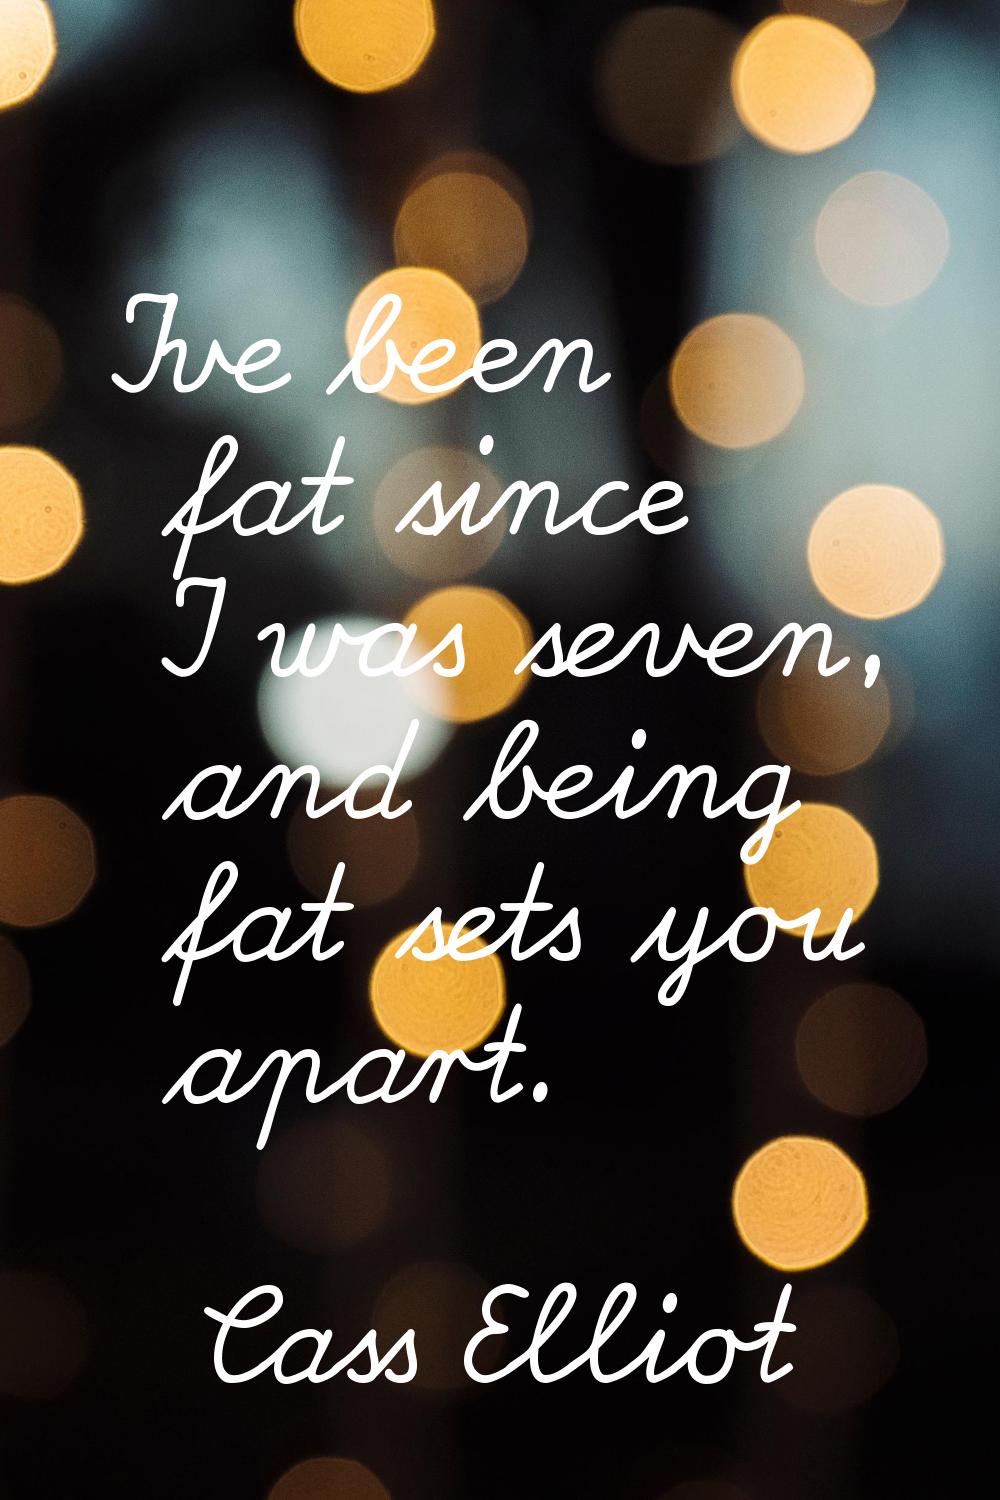 I've been fat since I was seven, and being fat sets you apart.